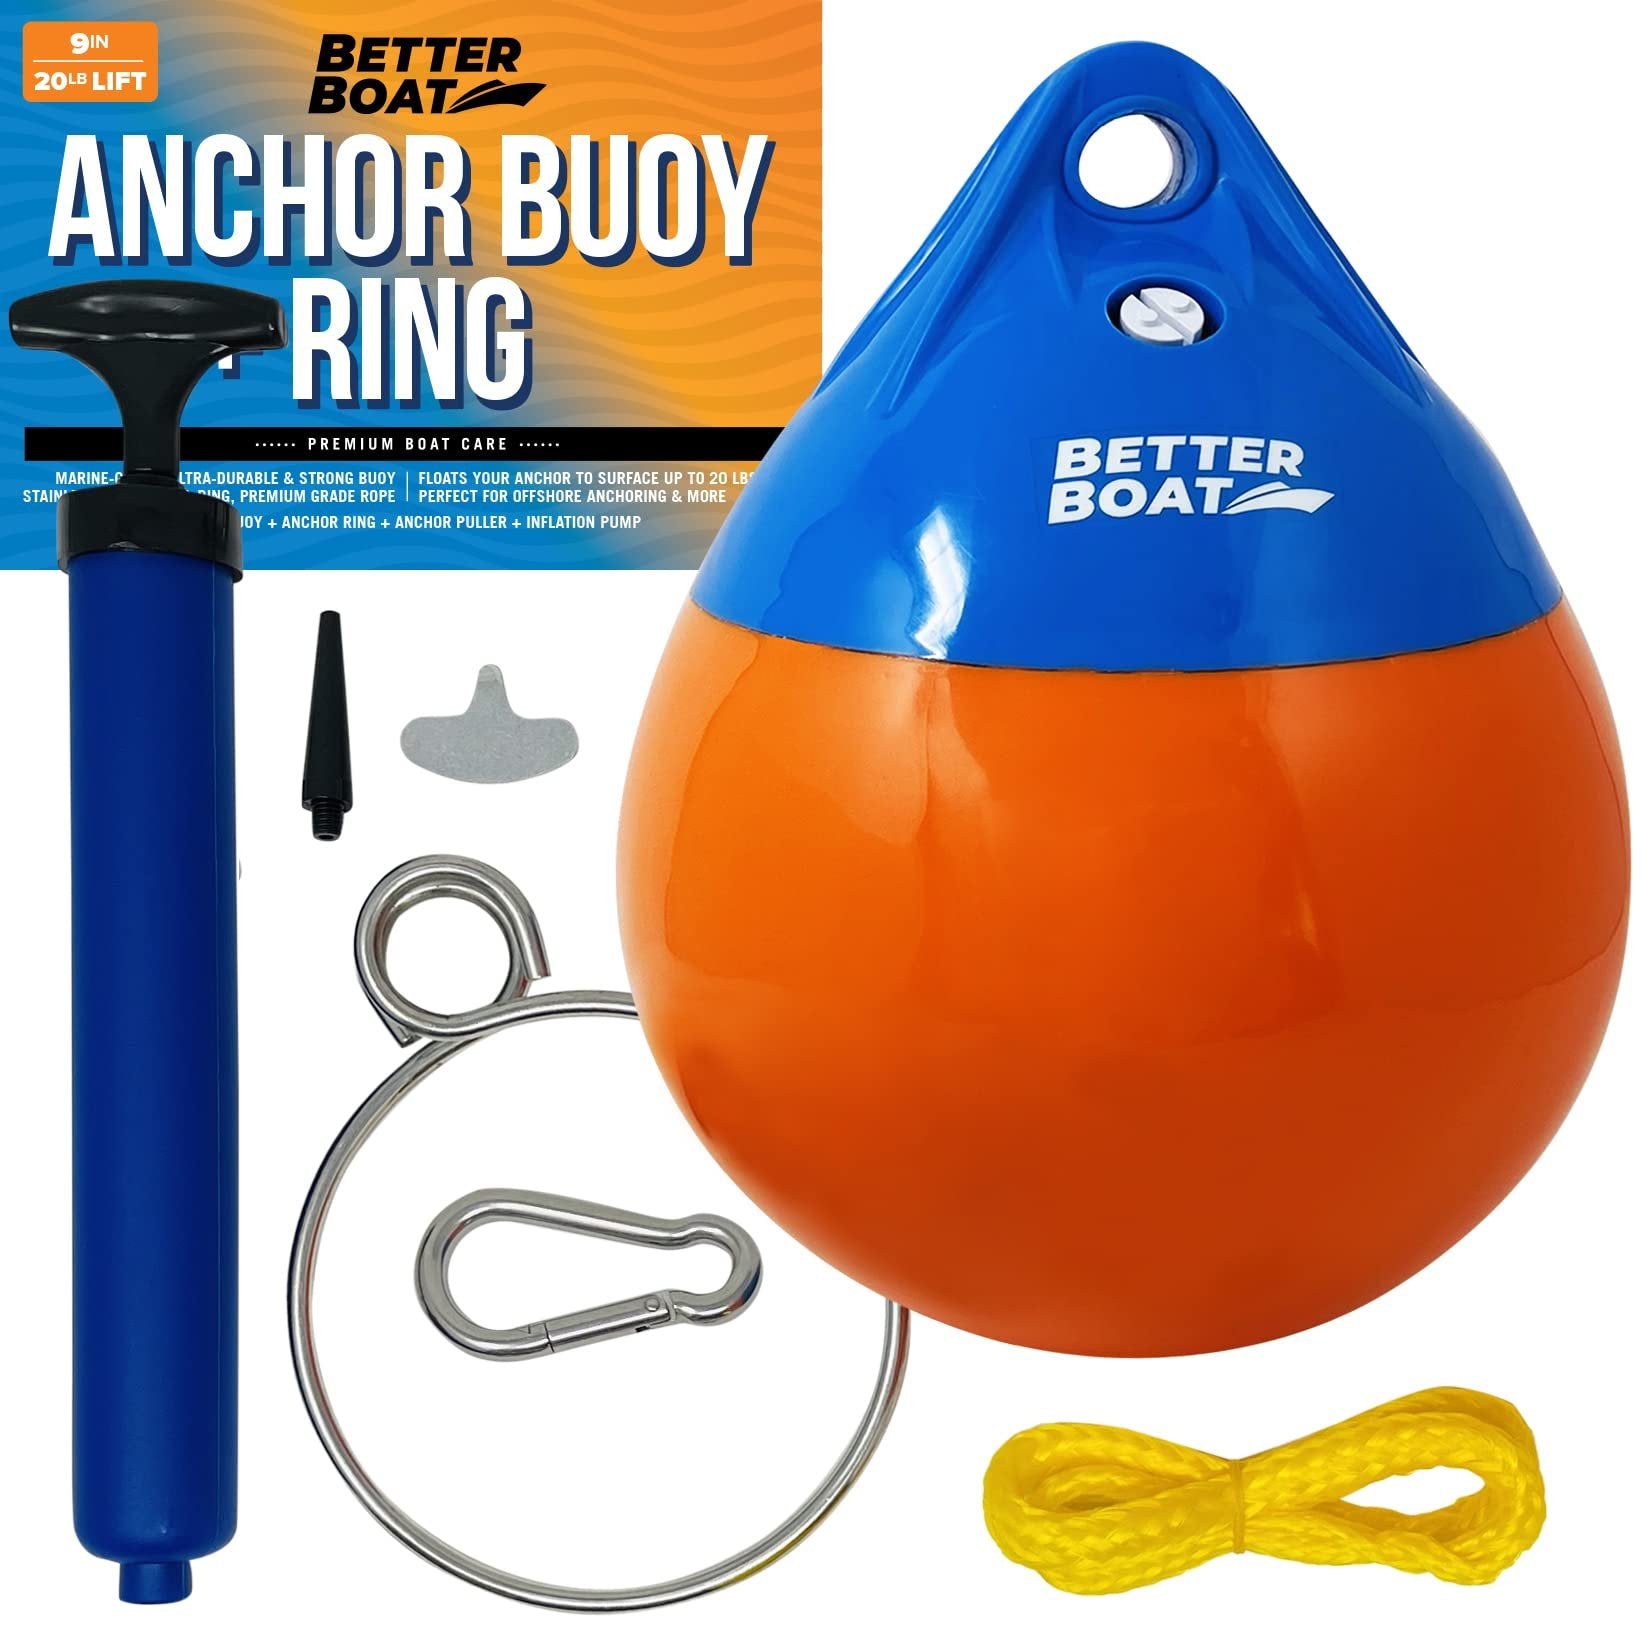 Anchor Buoy & Retrieval Ring Vinyl Boat Bouy Balls Round Boat Mooring Buoys, Bumper or Marker and Anchor Float Ball Floating Pick Up for Rope Line Crab Pot Puller or Inflatable Dock Sea & Lake